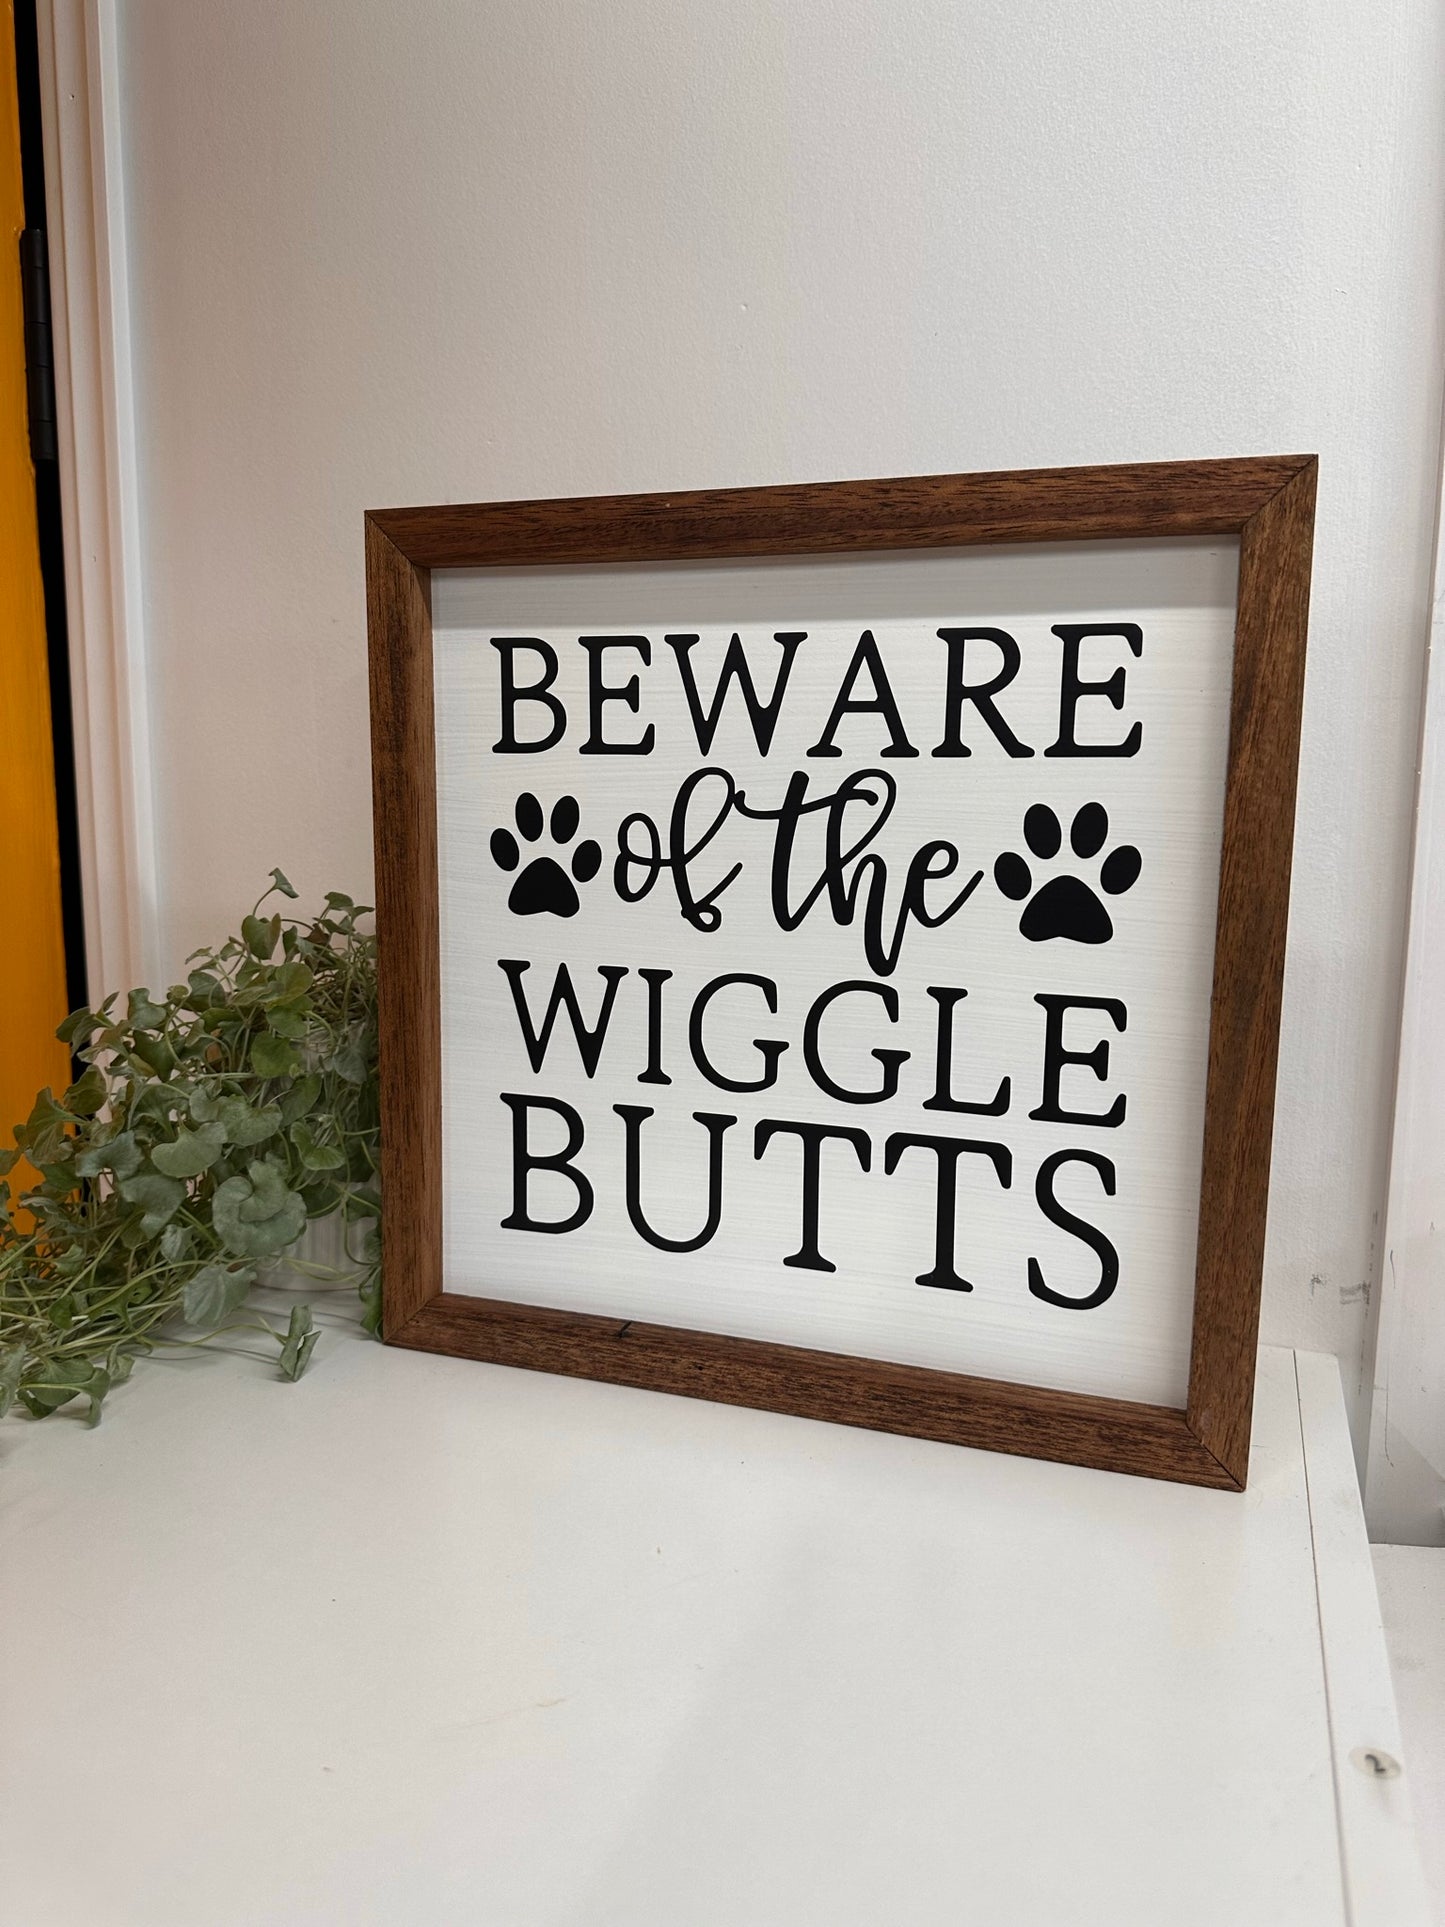 Beware of the Wigglebutts